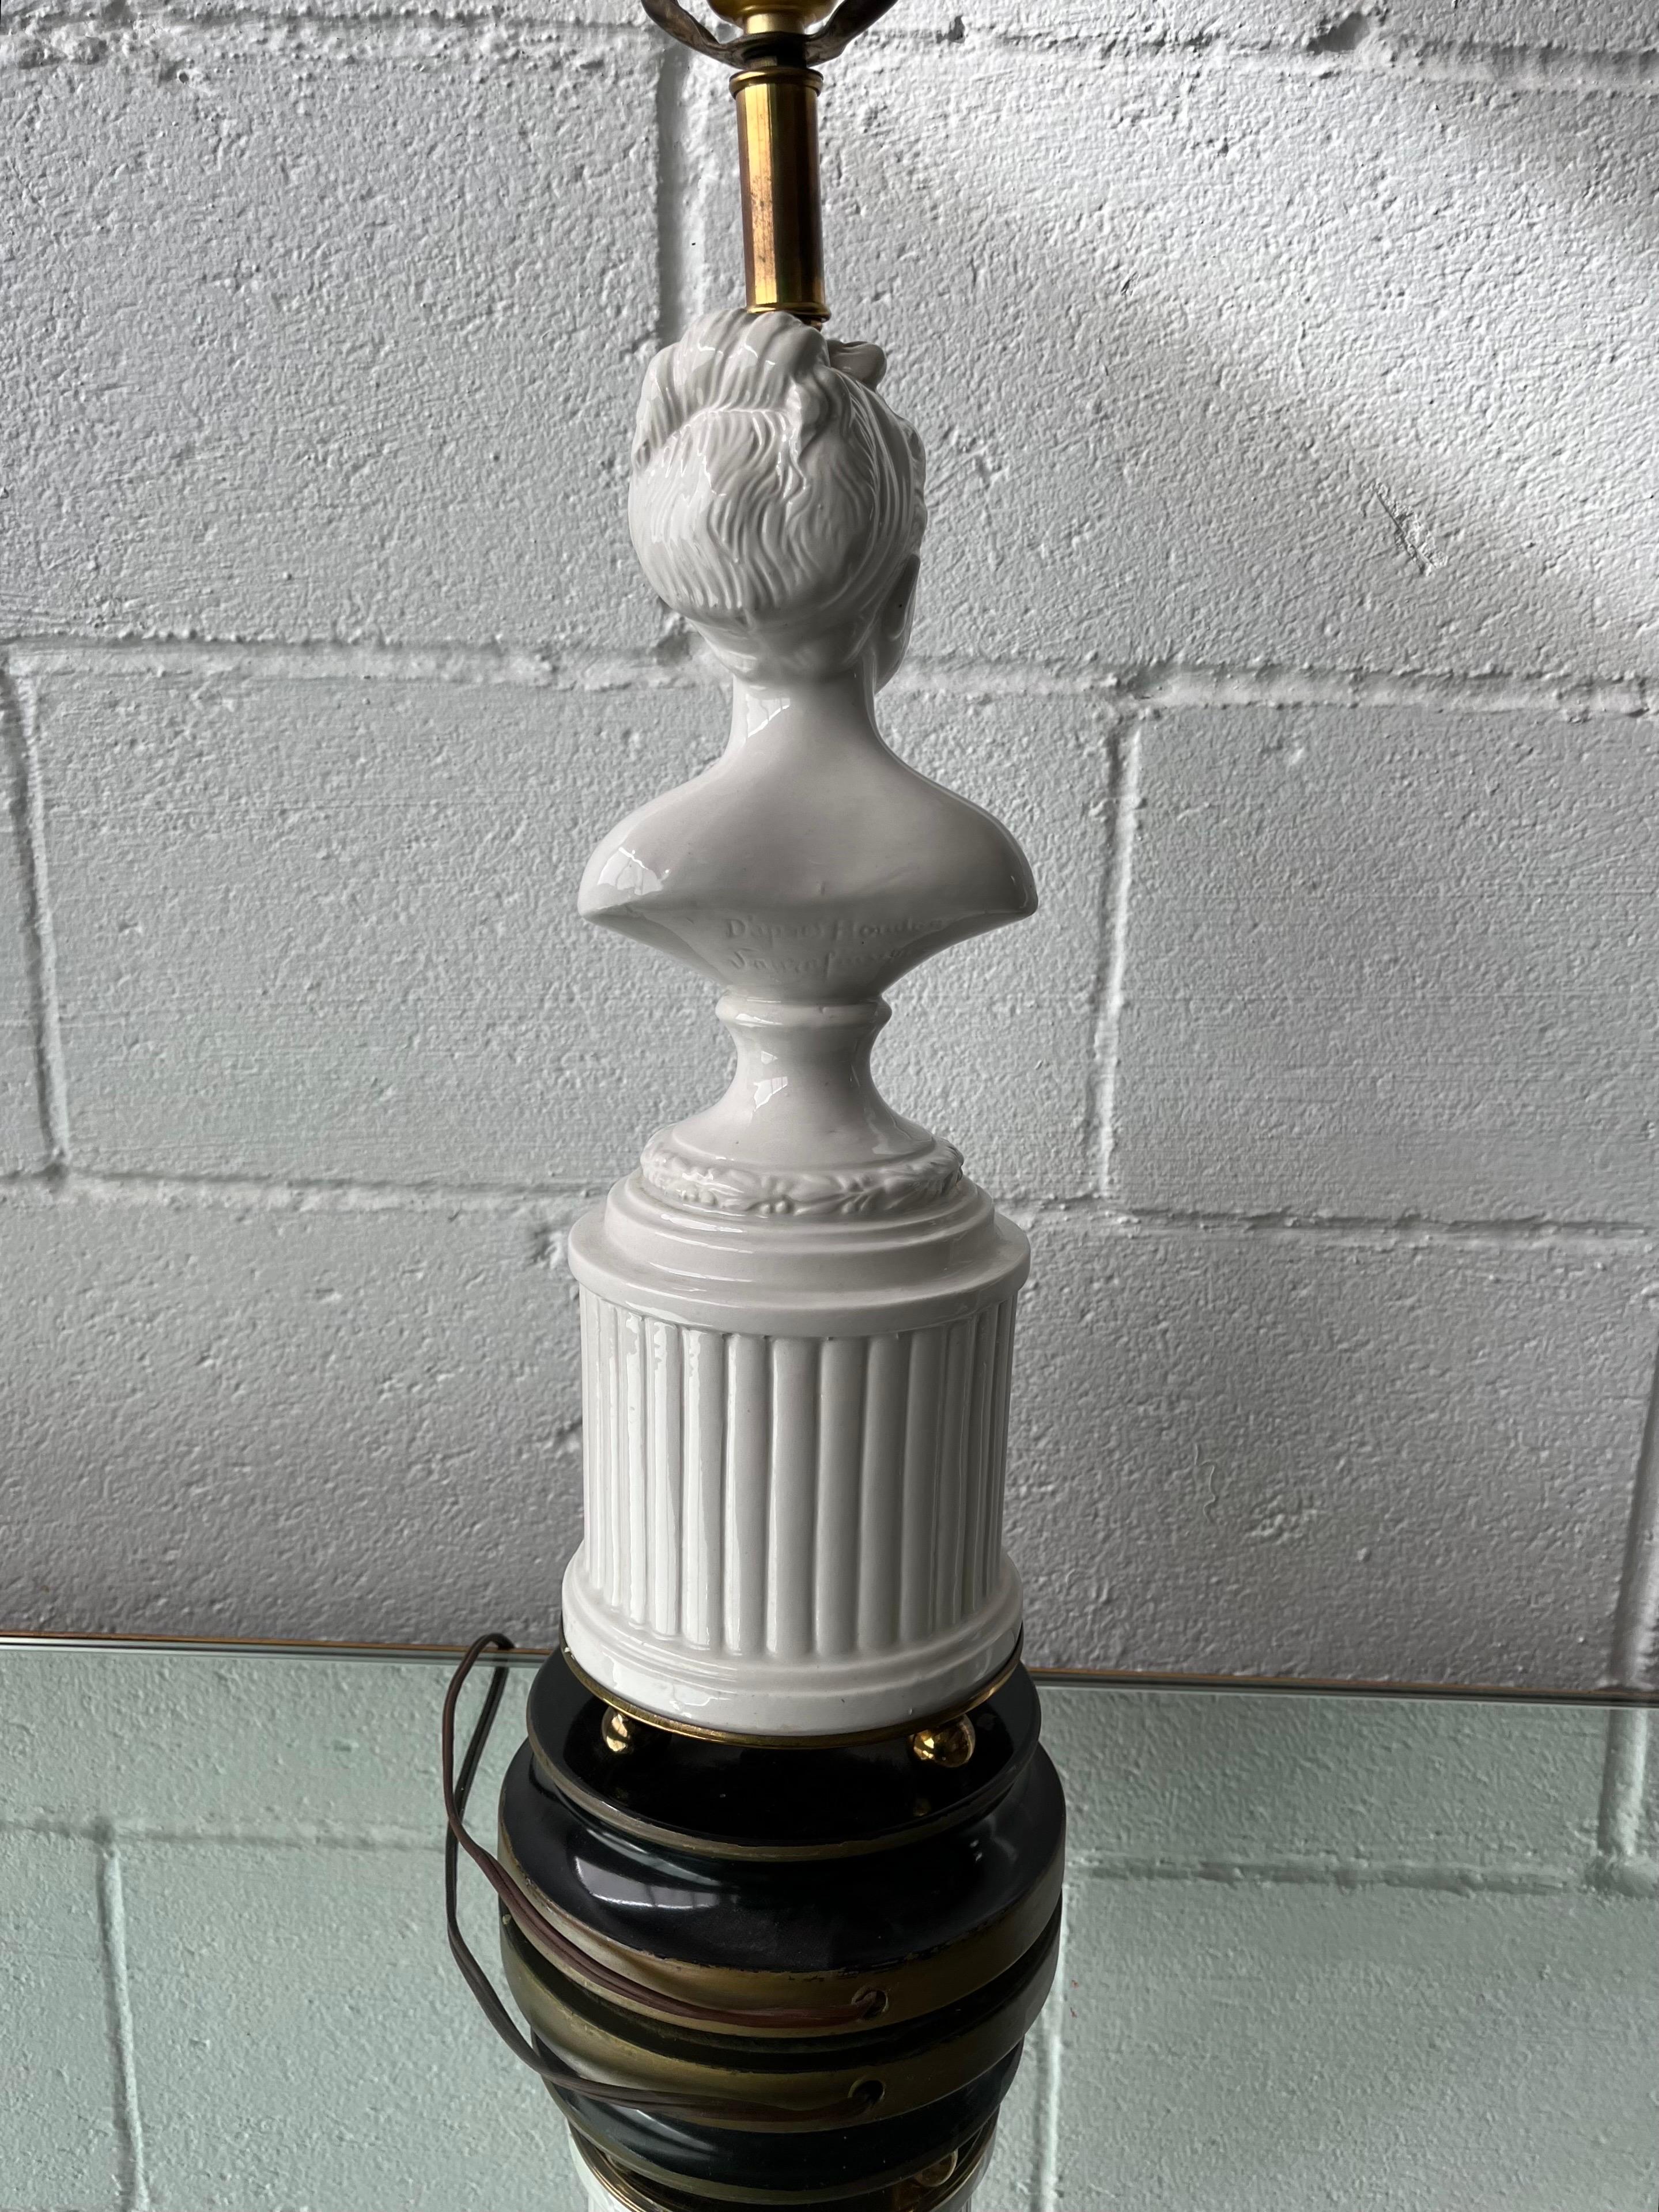 Beautiful Houdon Bust lamp. Such beauty in the subject, nicely finished in high glass glaze. Sits atop a beautiful fluted column topped with laurel wreath and balled base plinth. Signed.
33.5 inches to top of finial as pictured.